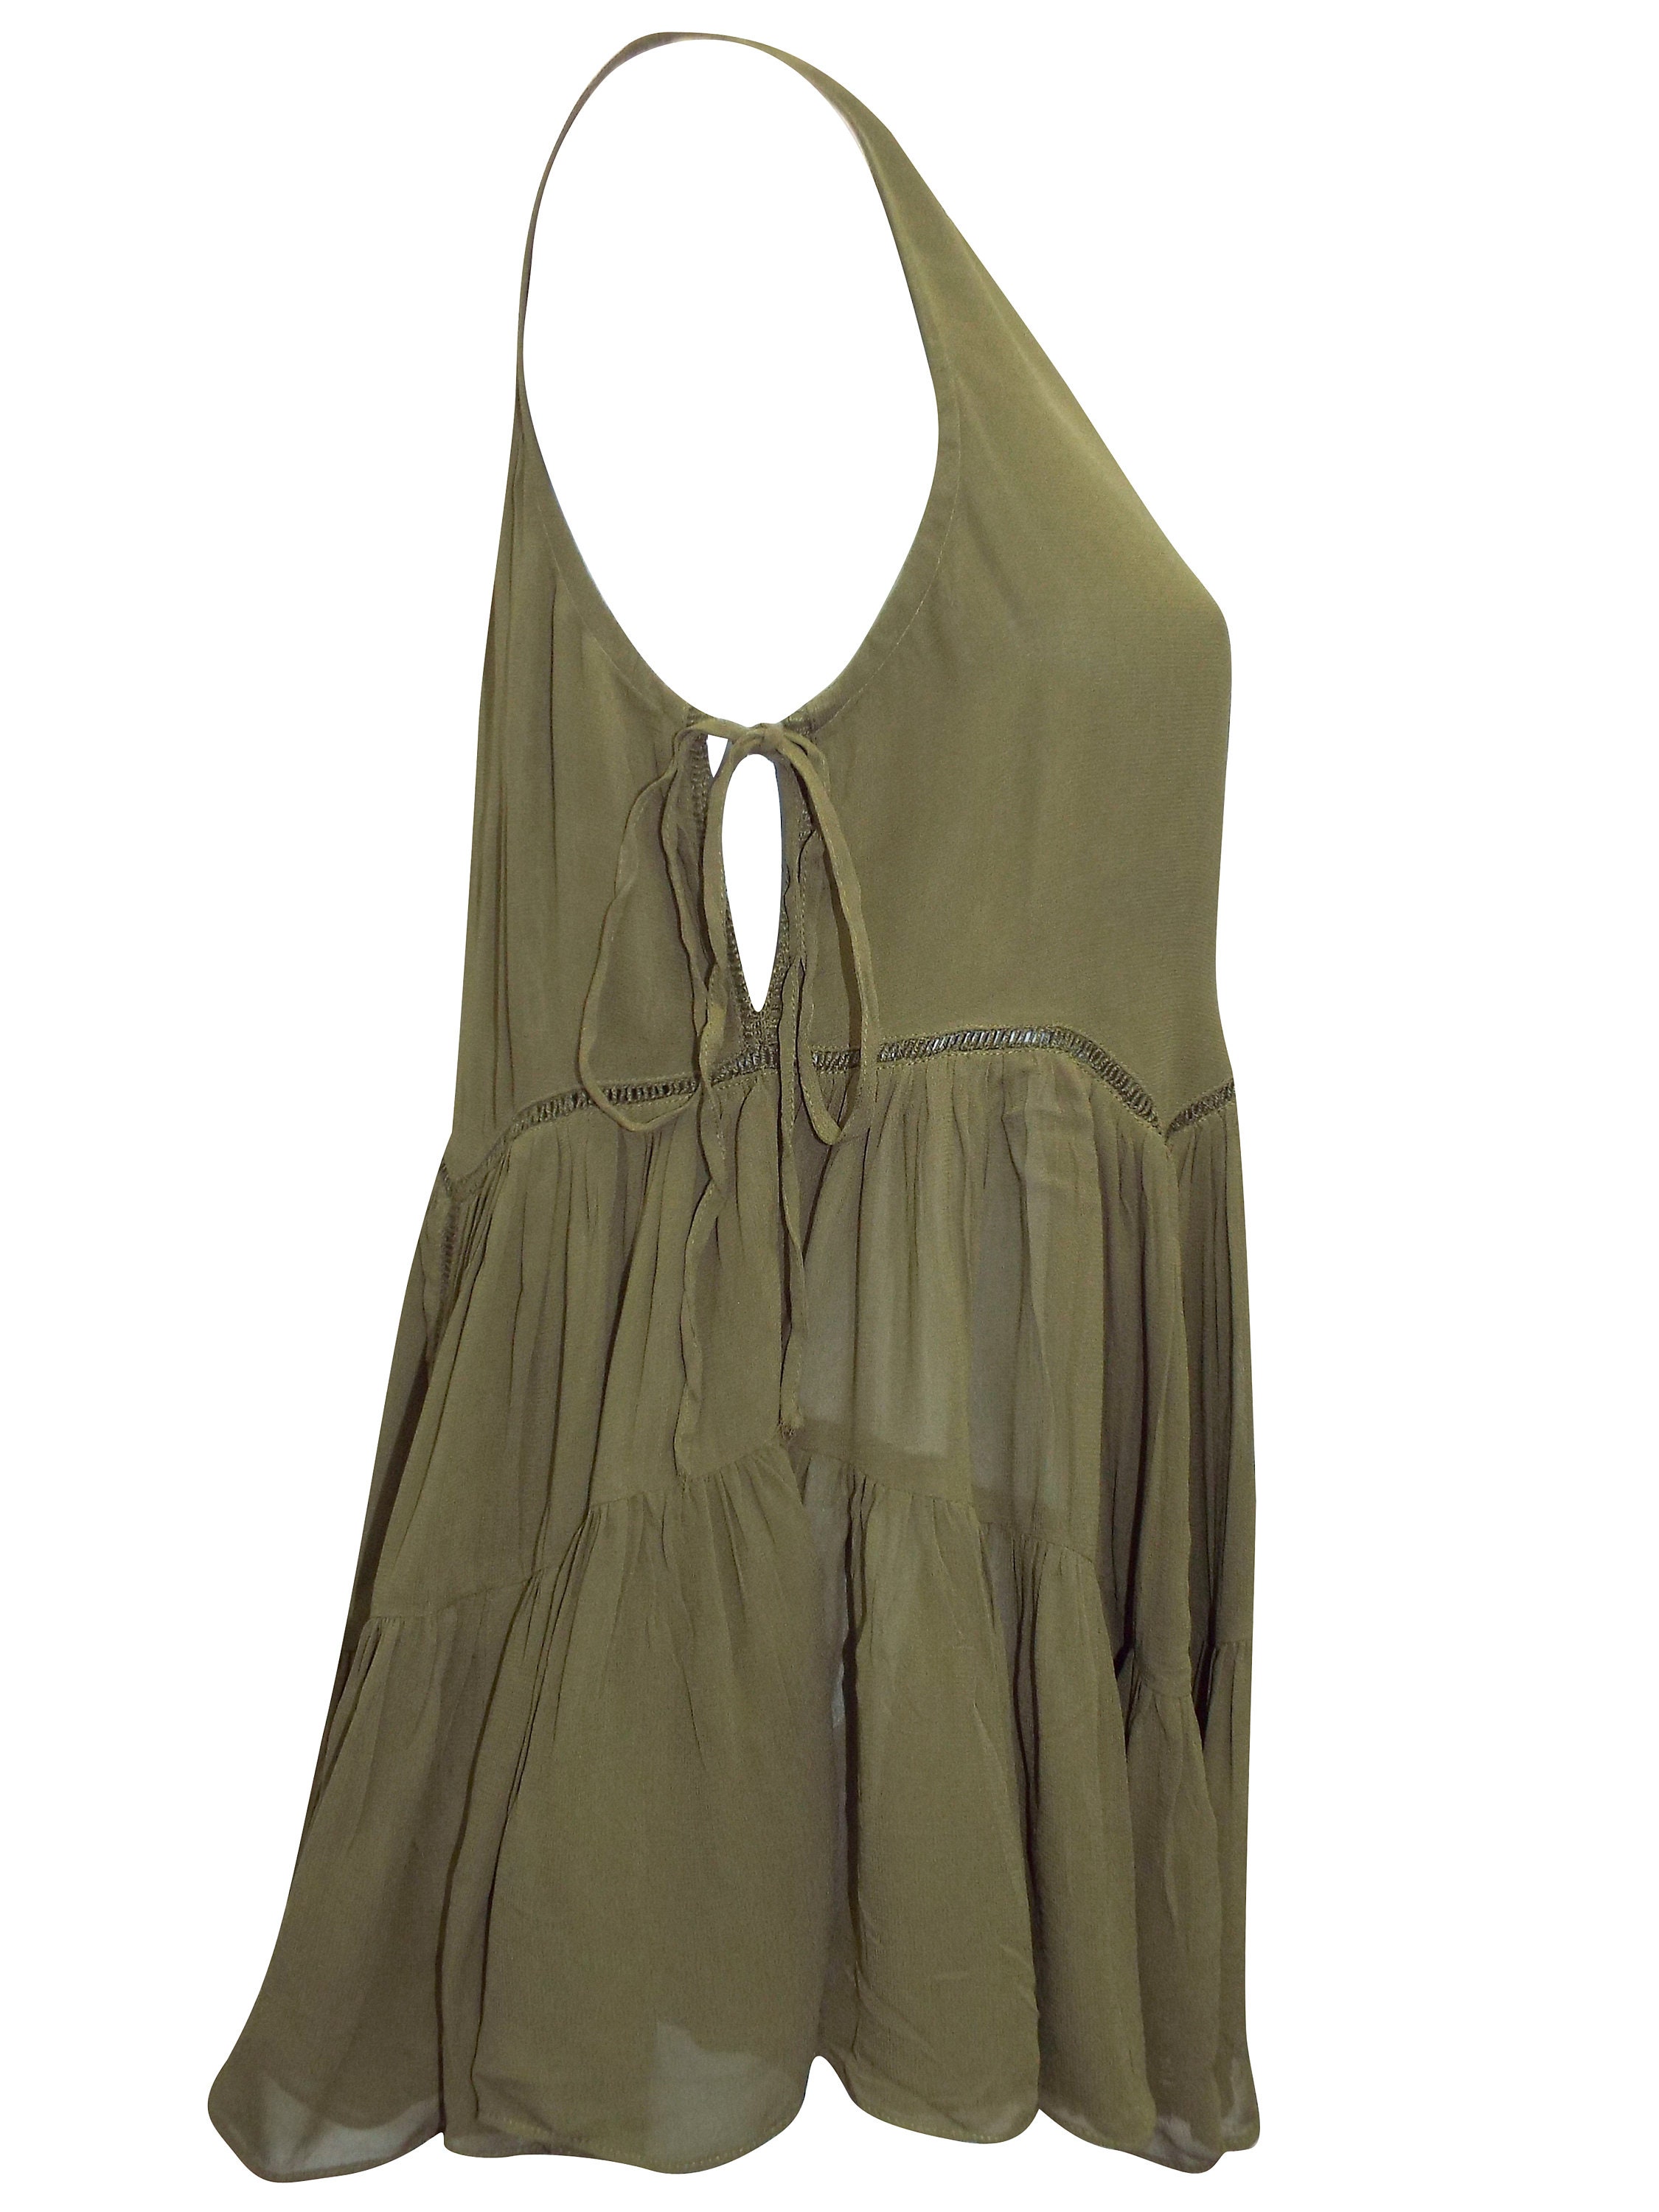 Ladies OLIVE Ladder Trim Boho Swing Sleeveless Side Tie Top Size 6 to 22 